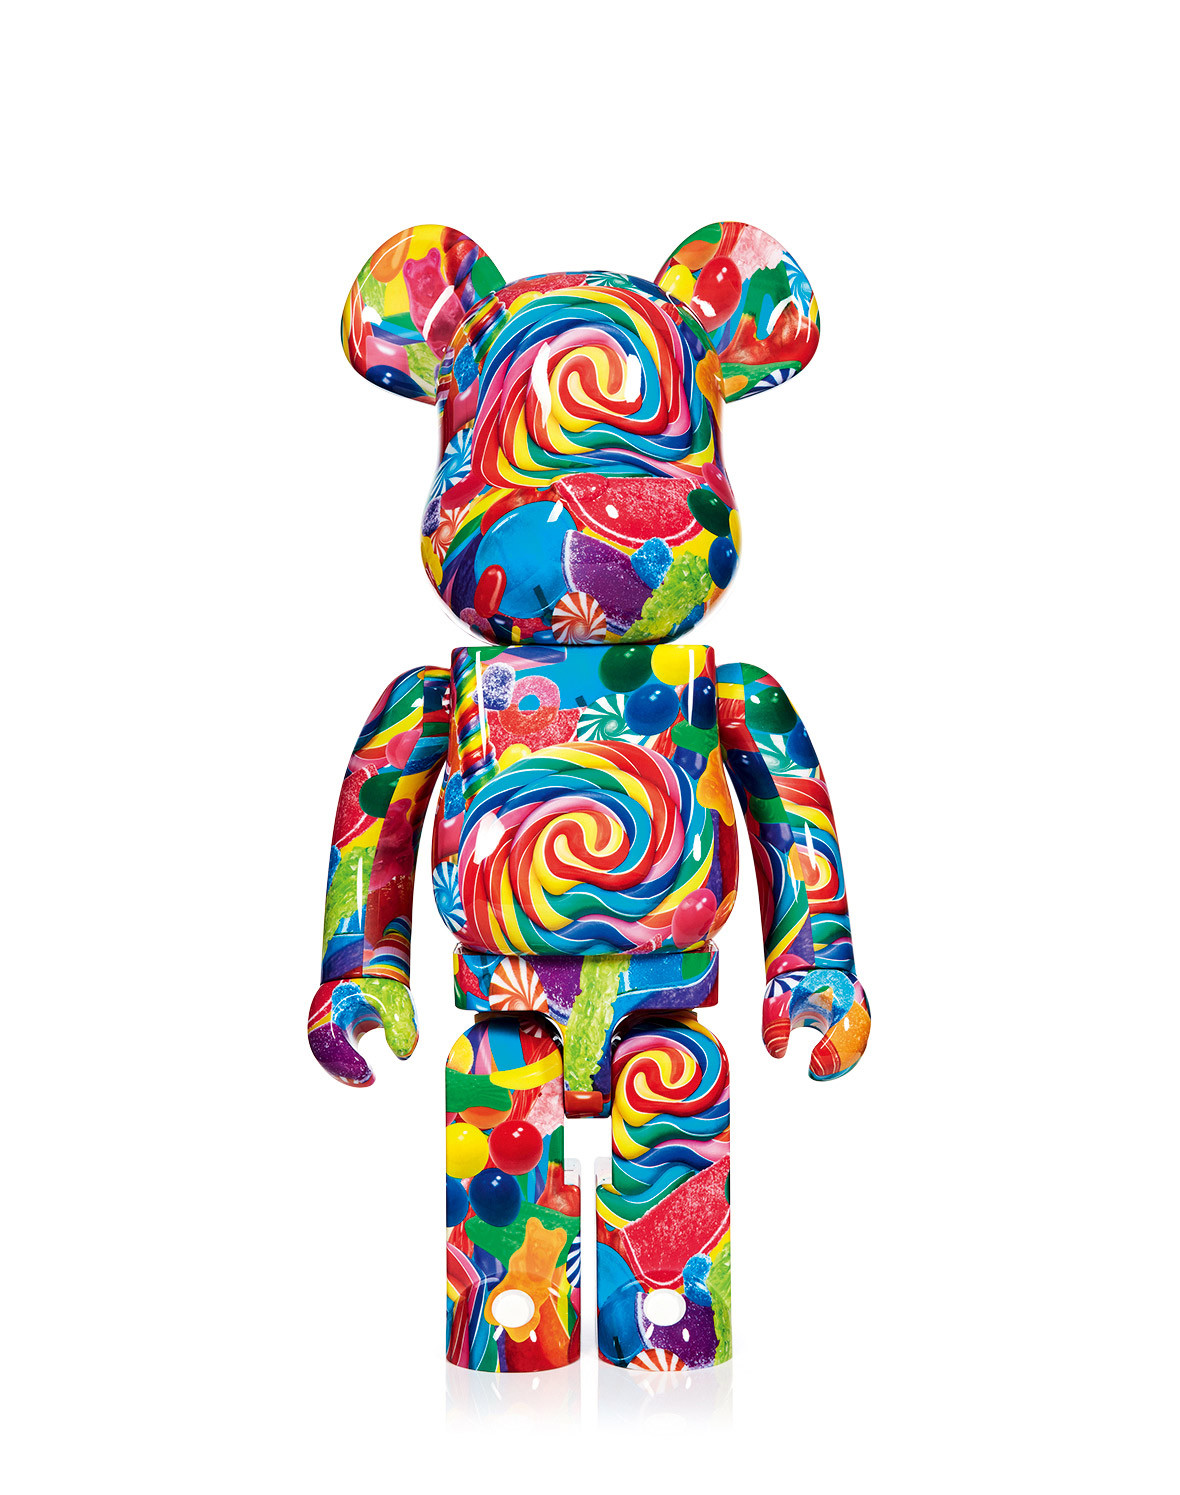 BEARBRICK CANDY LIMITED EDITION 1000%